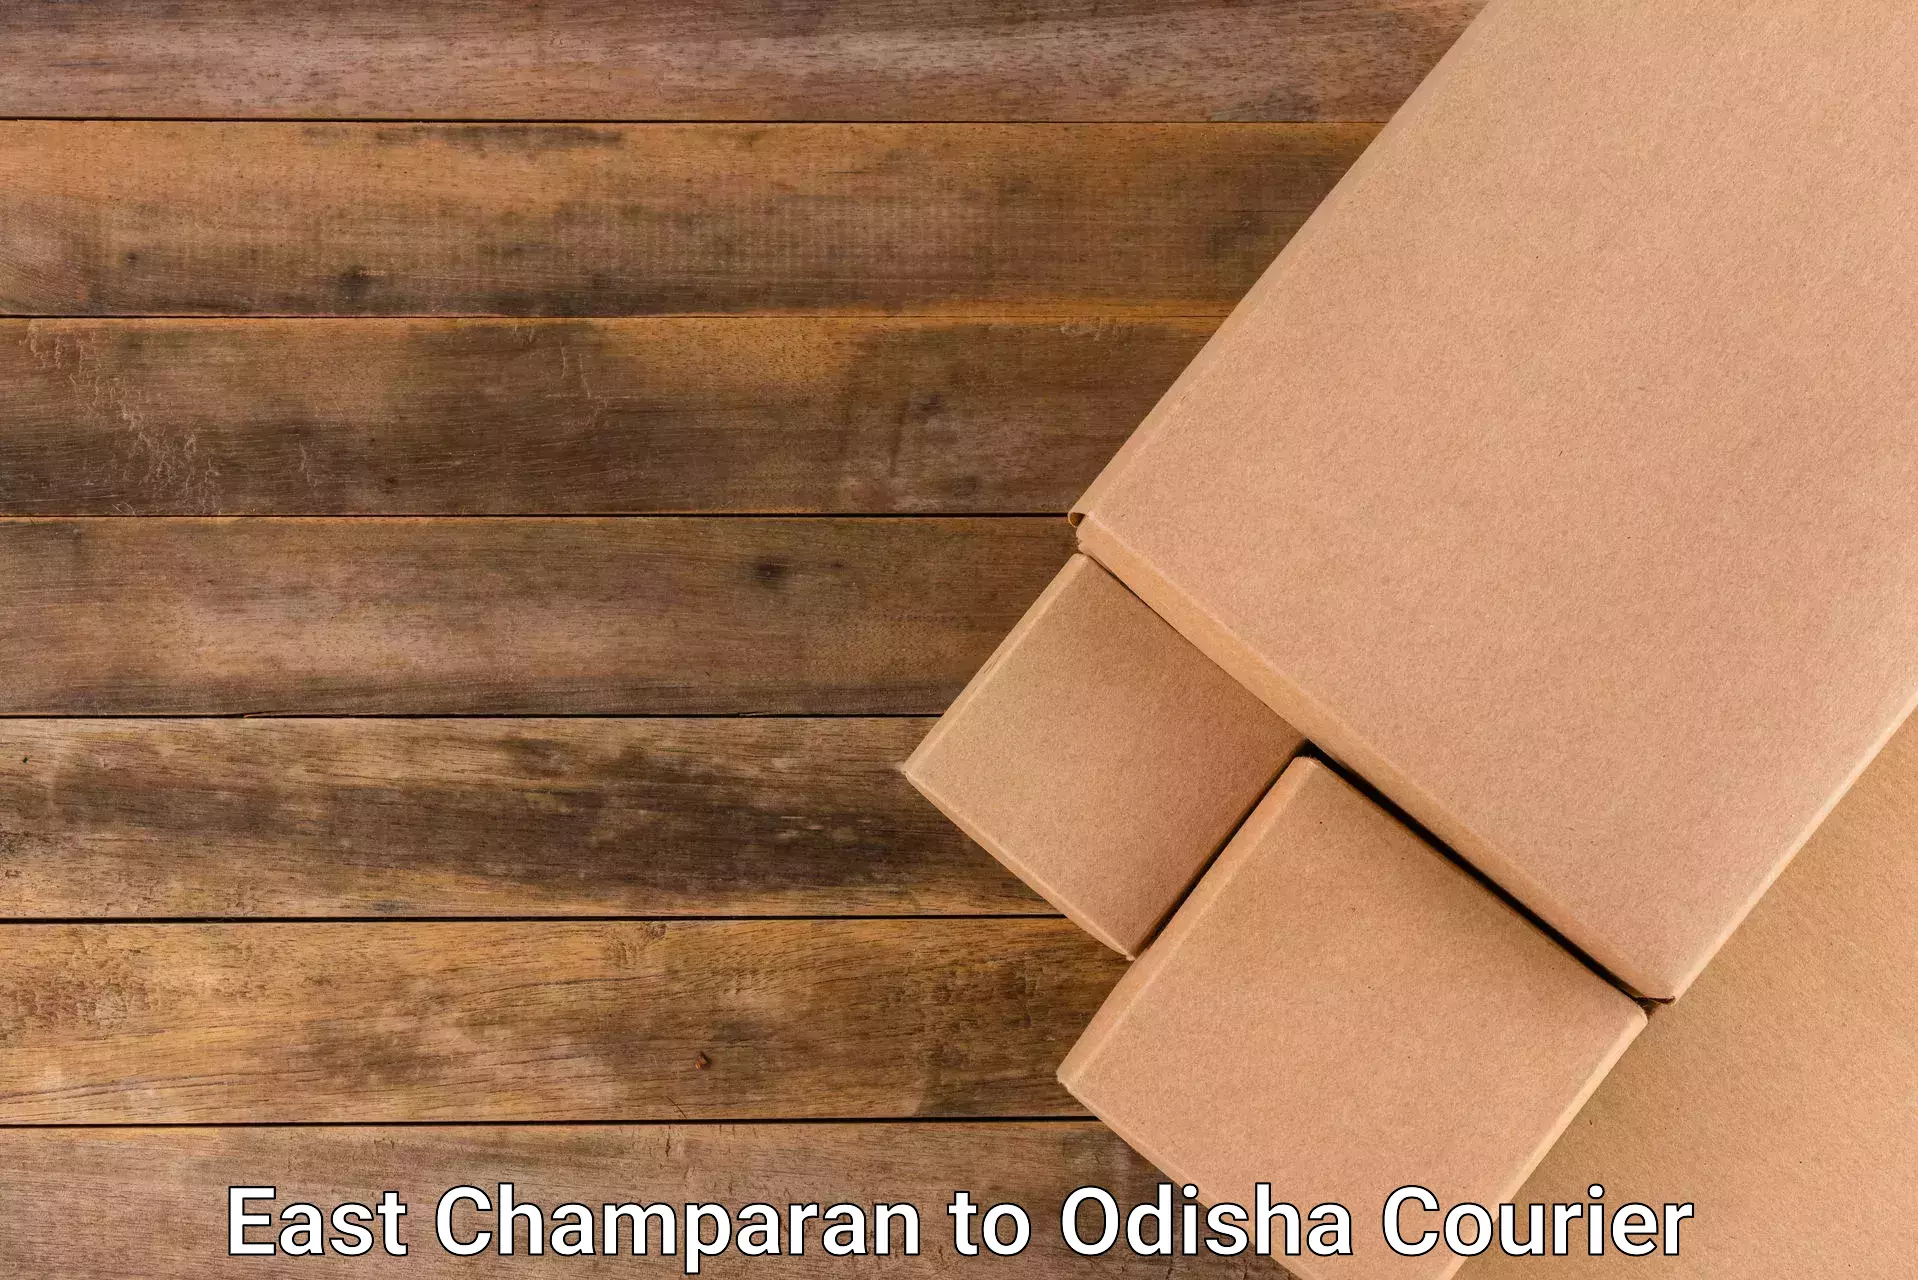 Tech-enabled shipping East Champaran to Jeypore